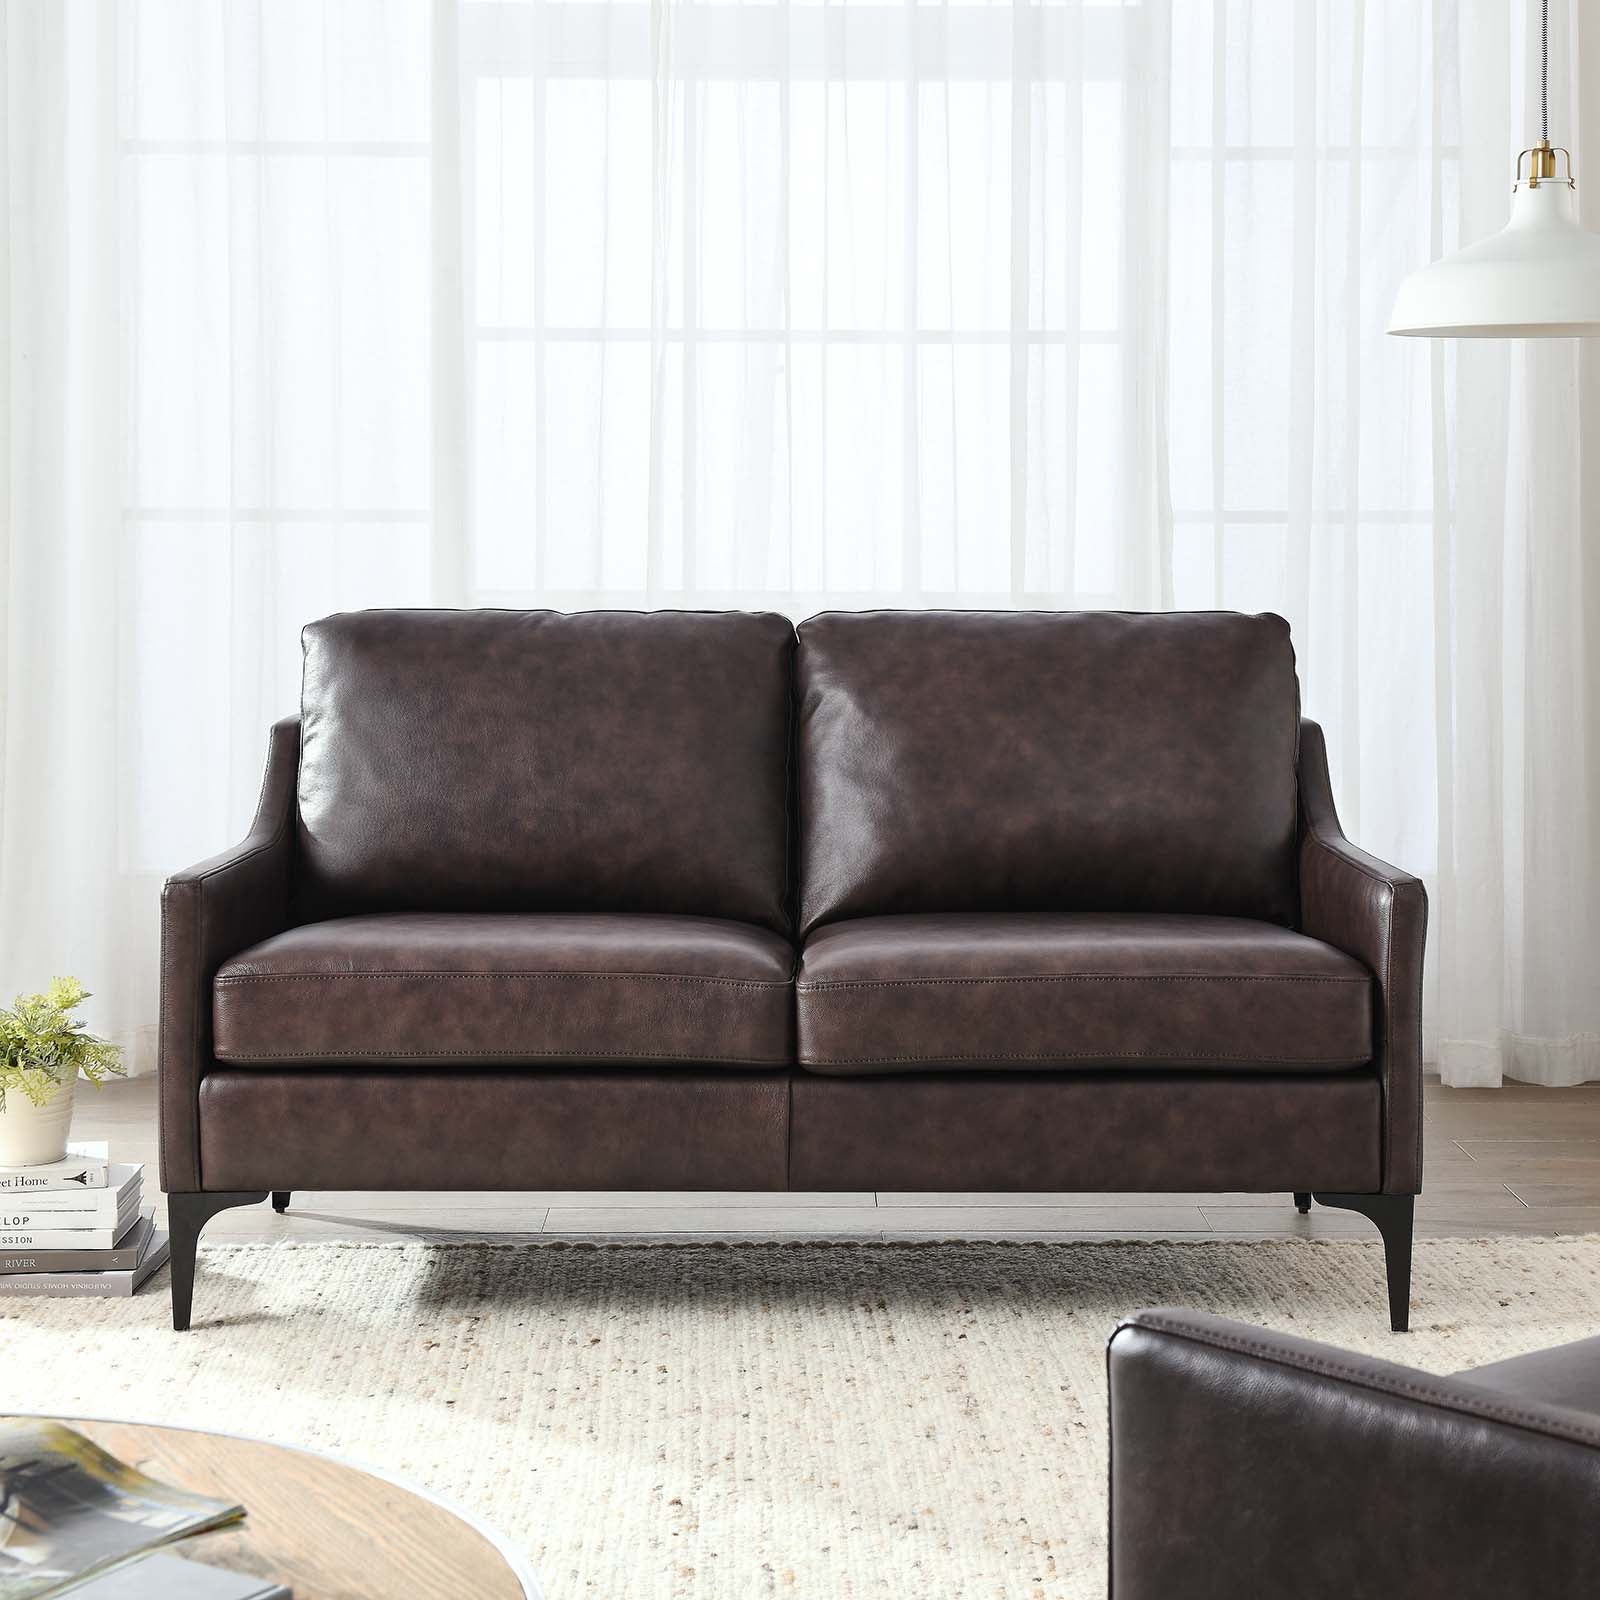 Corland Leather Loveseat - East Shore Modern Home Furnishings